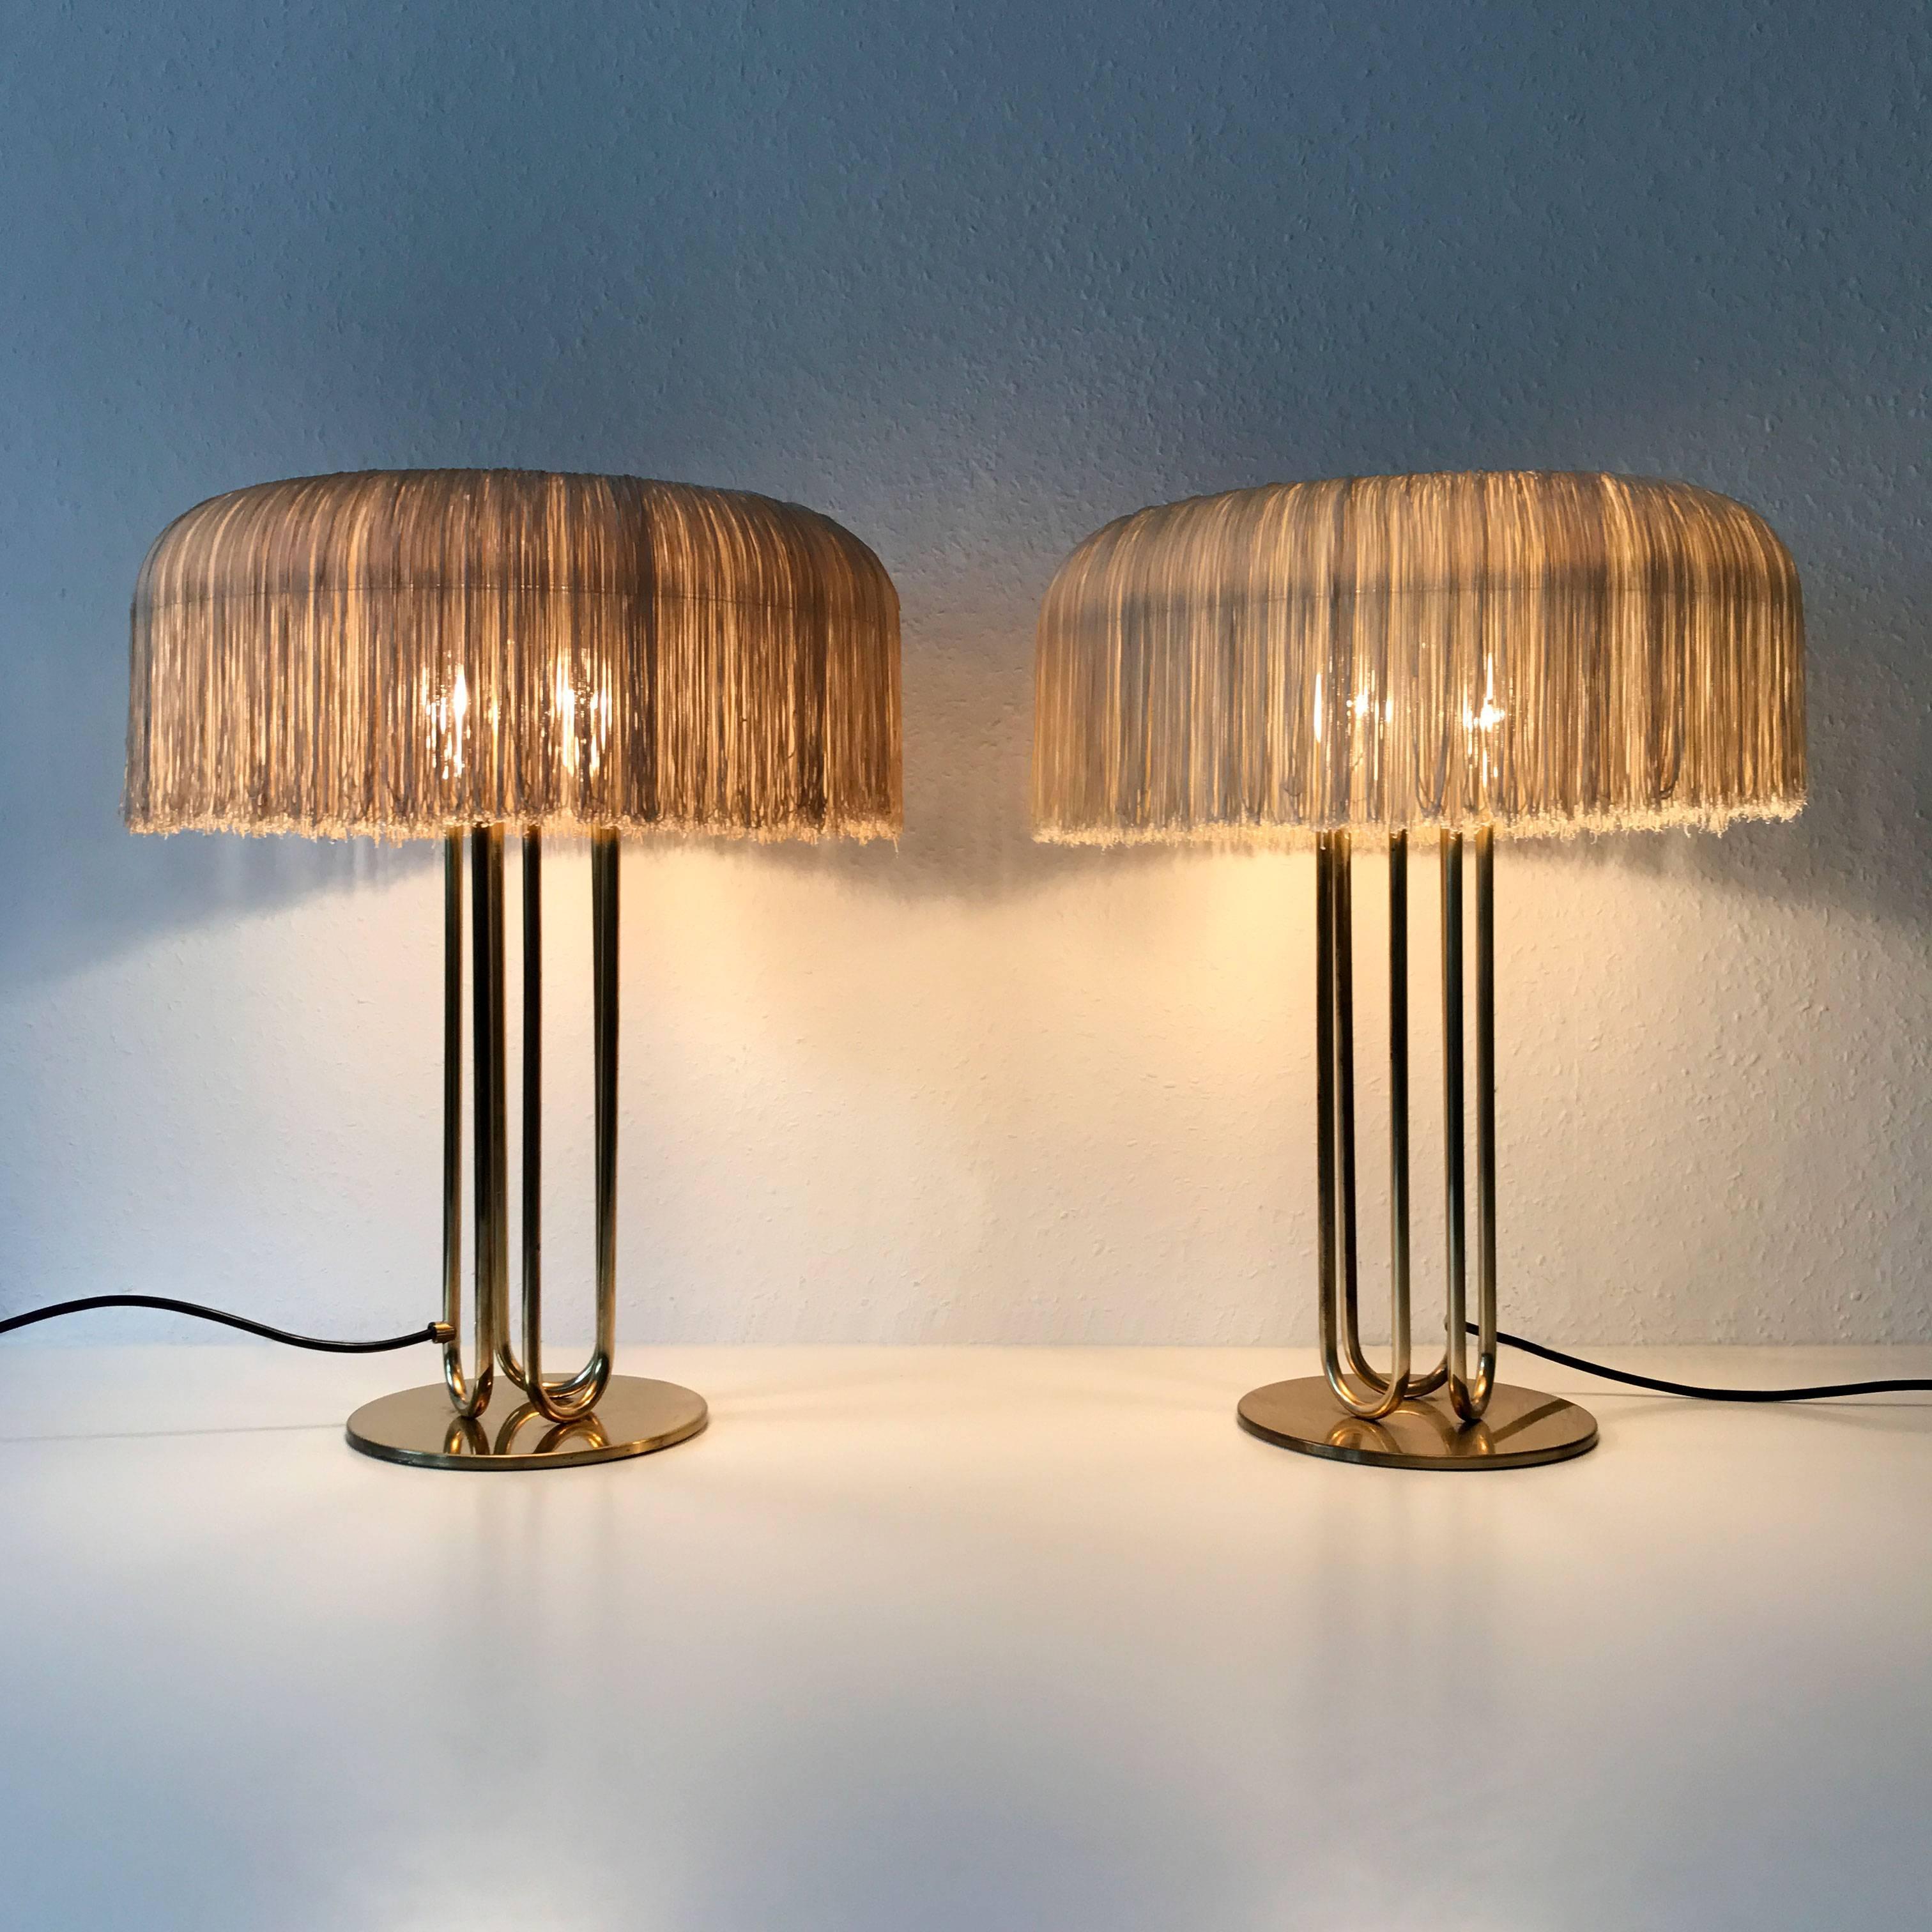 Extremely rare, elegant and large table lamps. Probably designed by Hans-Agne Jakobsson, Markaryd, Sweden, 1950s (Not marked). Executed in brass, anodized aluminium and silk fringes. The silk fringes of the both lamp with slight color difference.